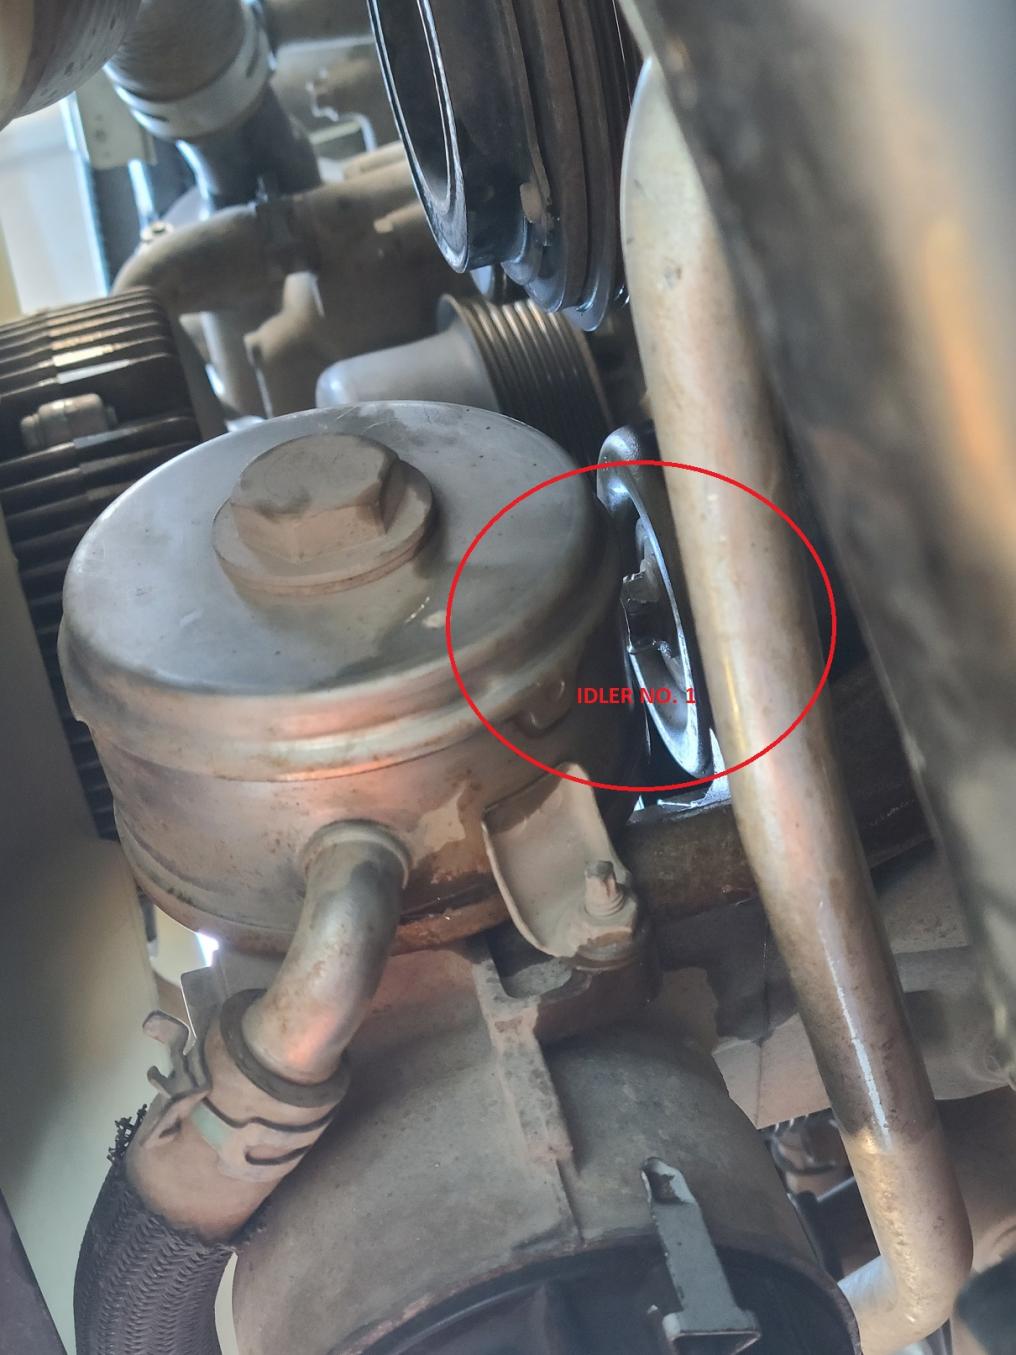 HELP: How to remove Idler No. 1 Bolt?-20220212_122129-jpg